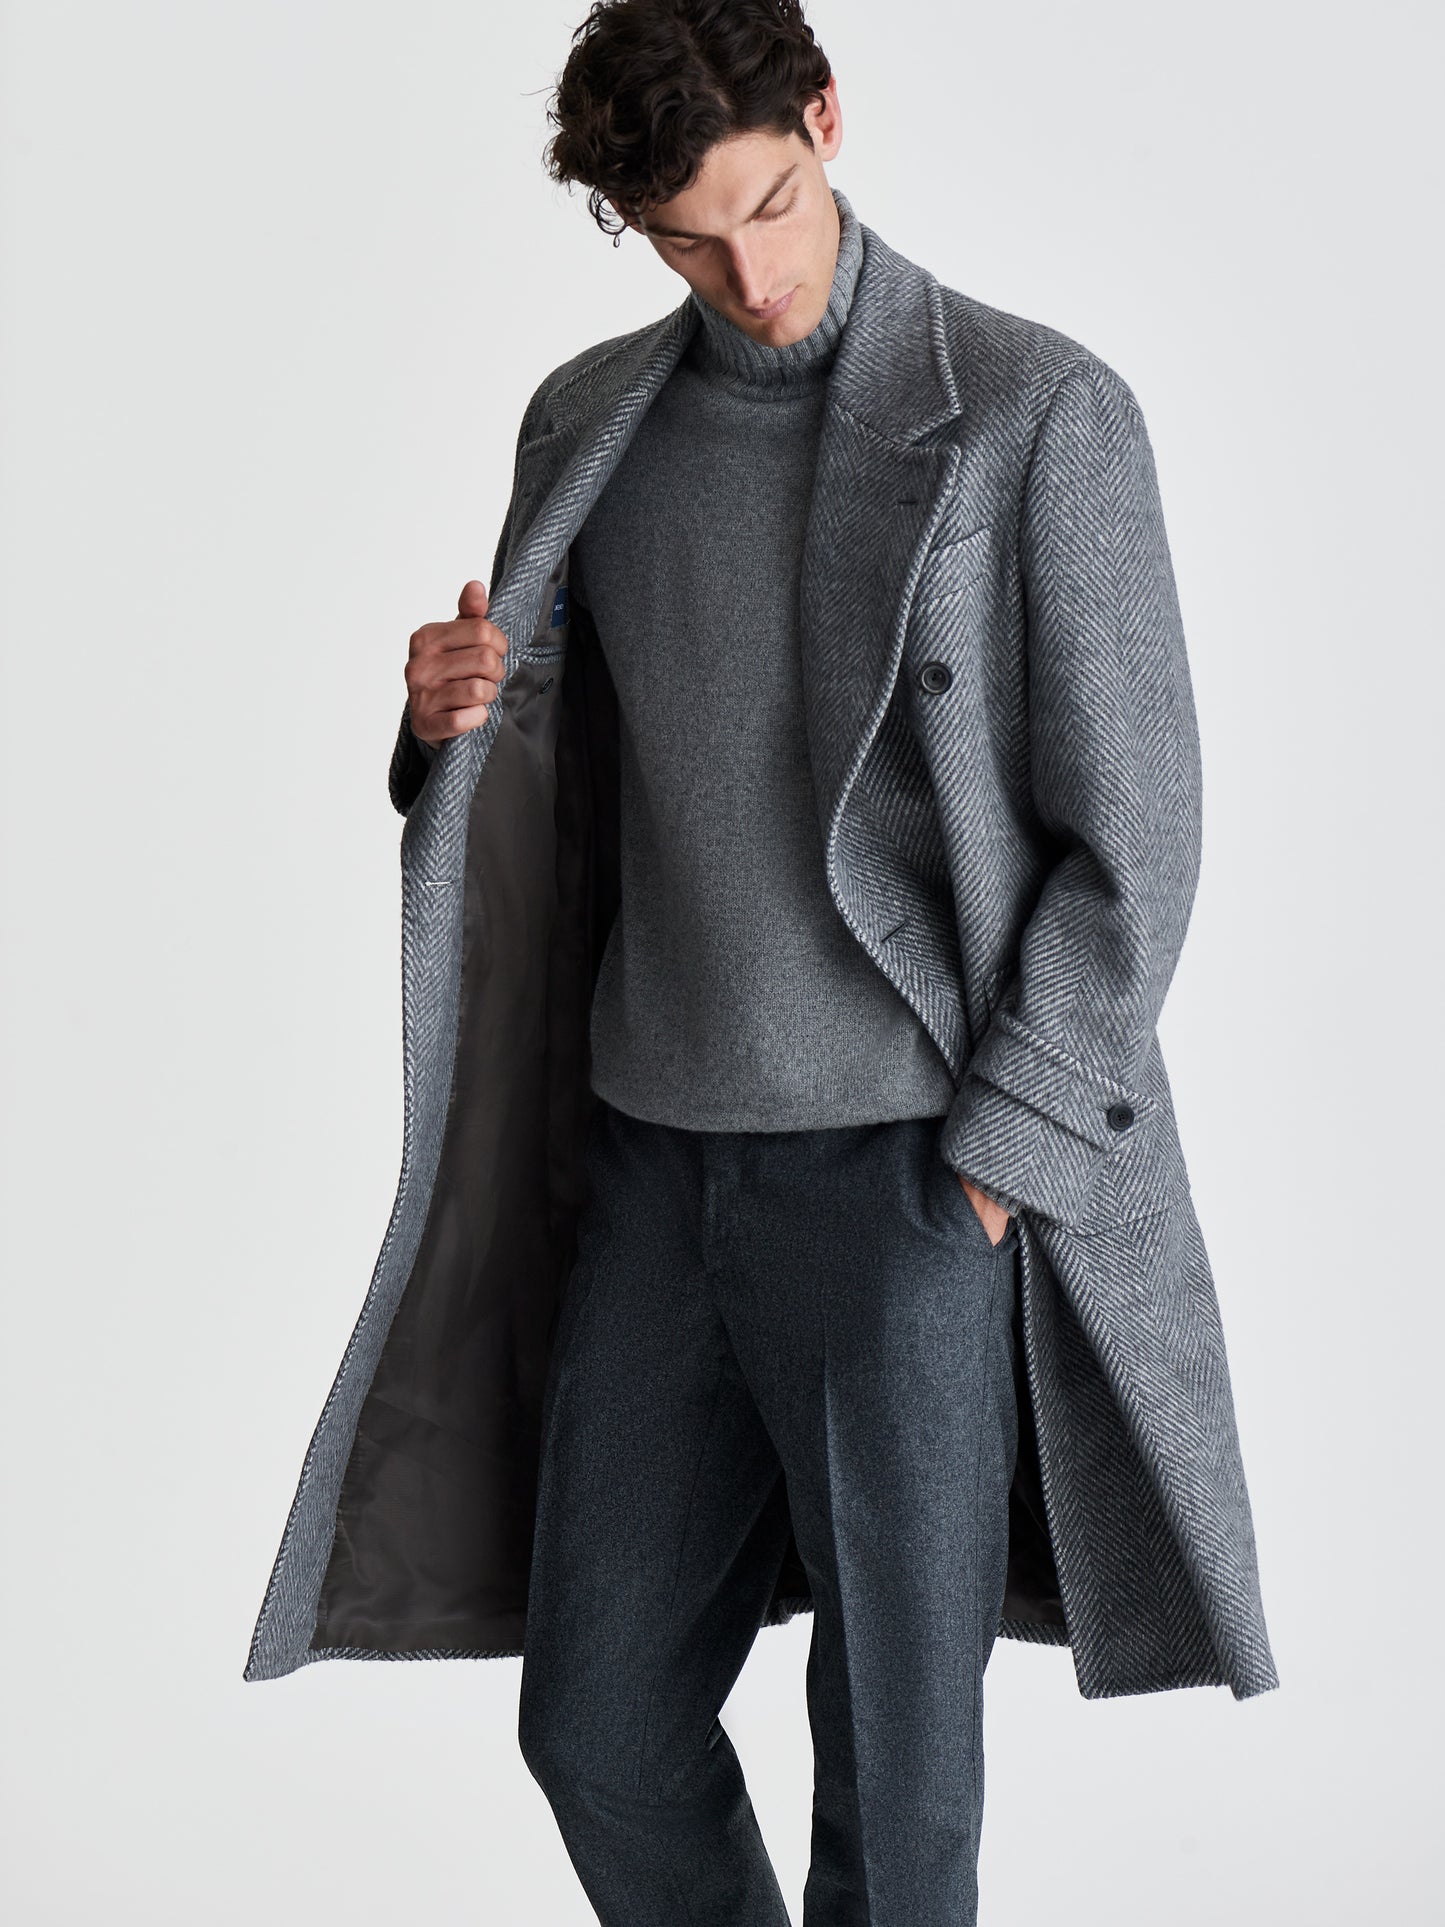 Wool Unstructured Double Breasted Overcoat Grey Twill Cropped Model Image